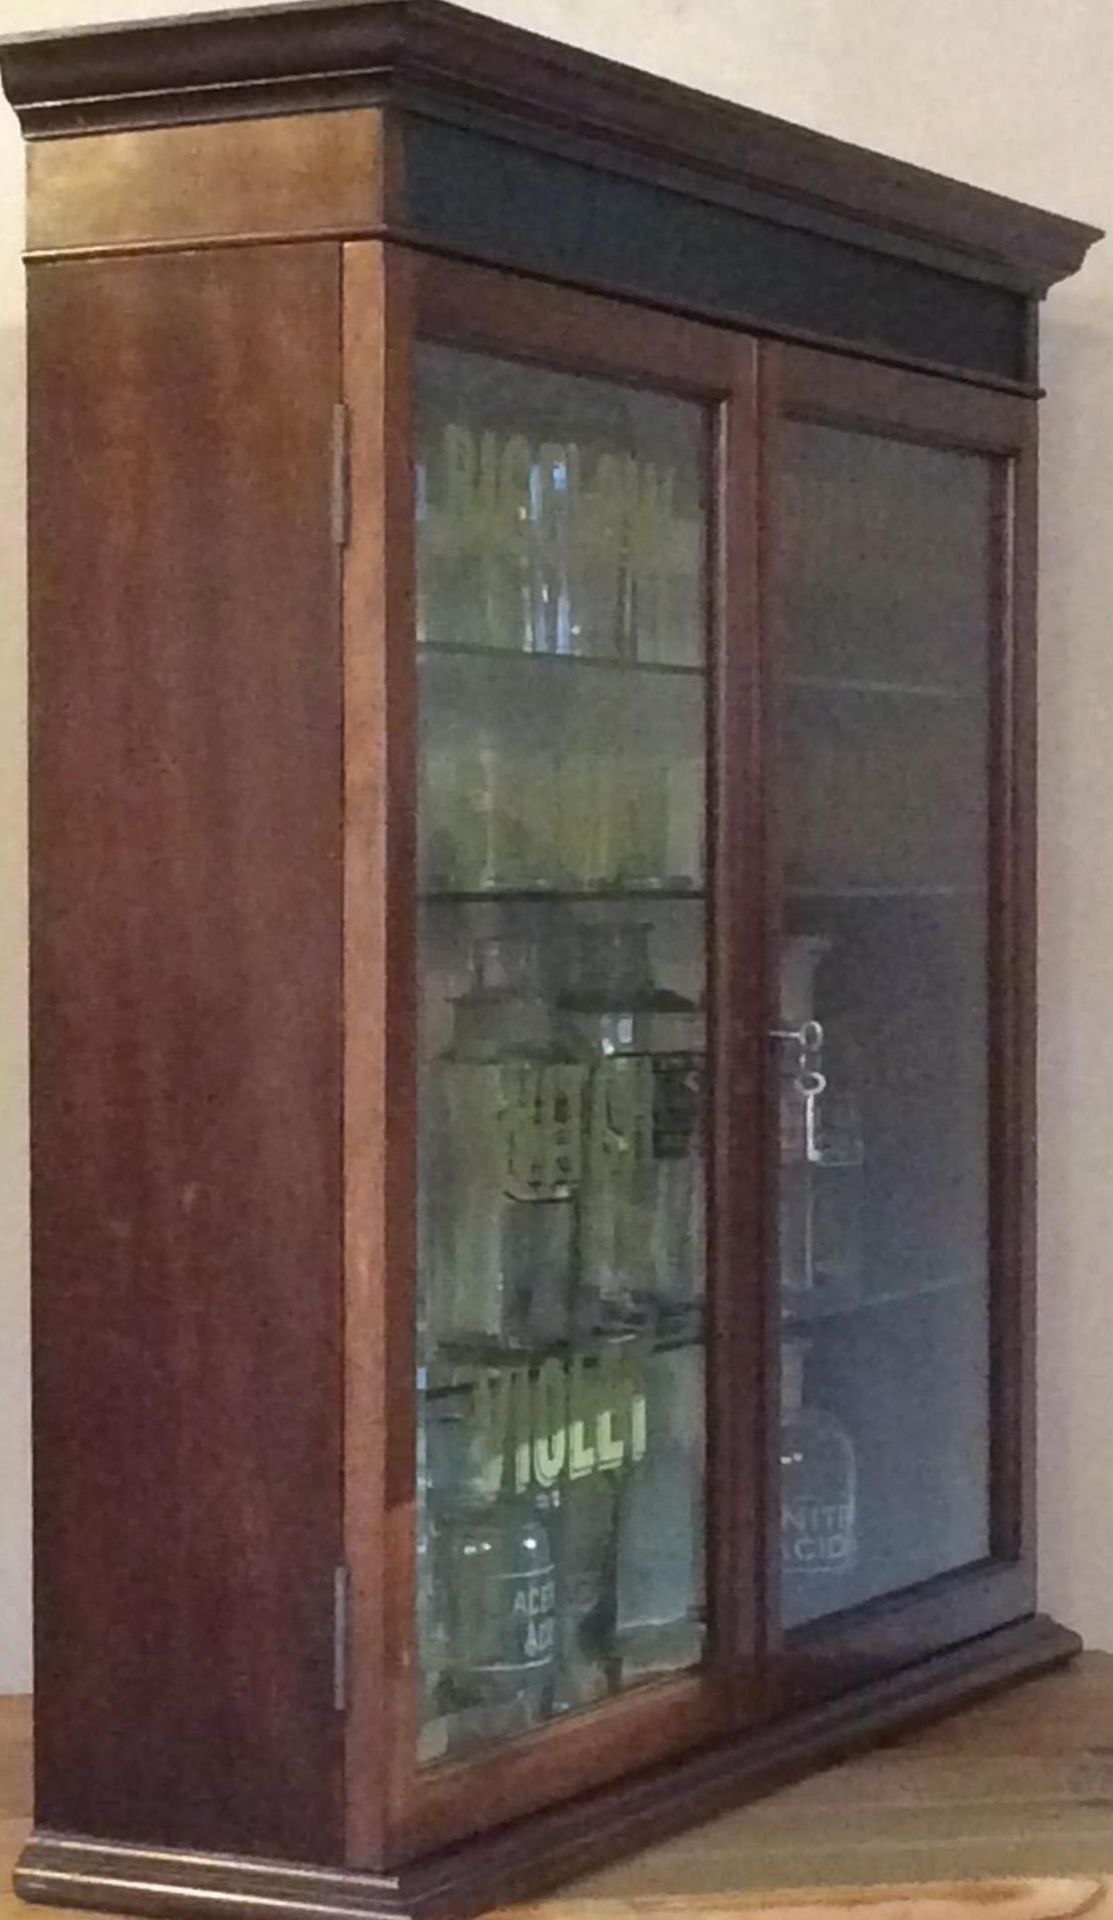 Excellent Pharmacy Mahogany Dispensing Cabinet - Image 11 of 16